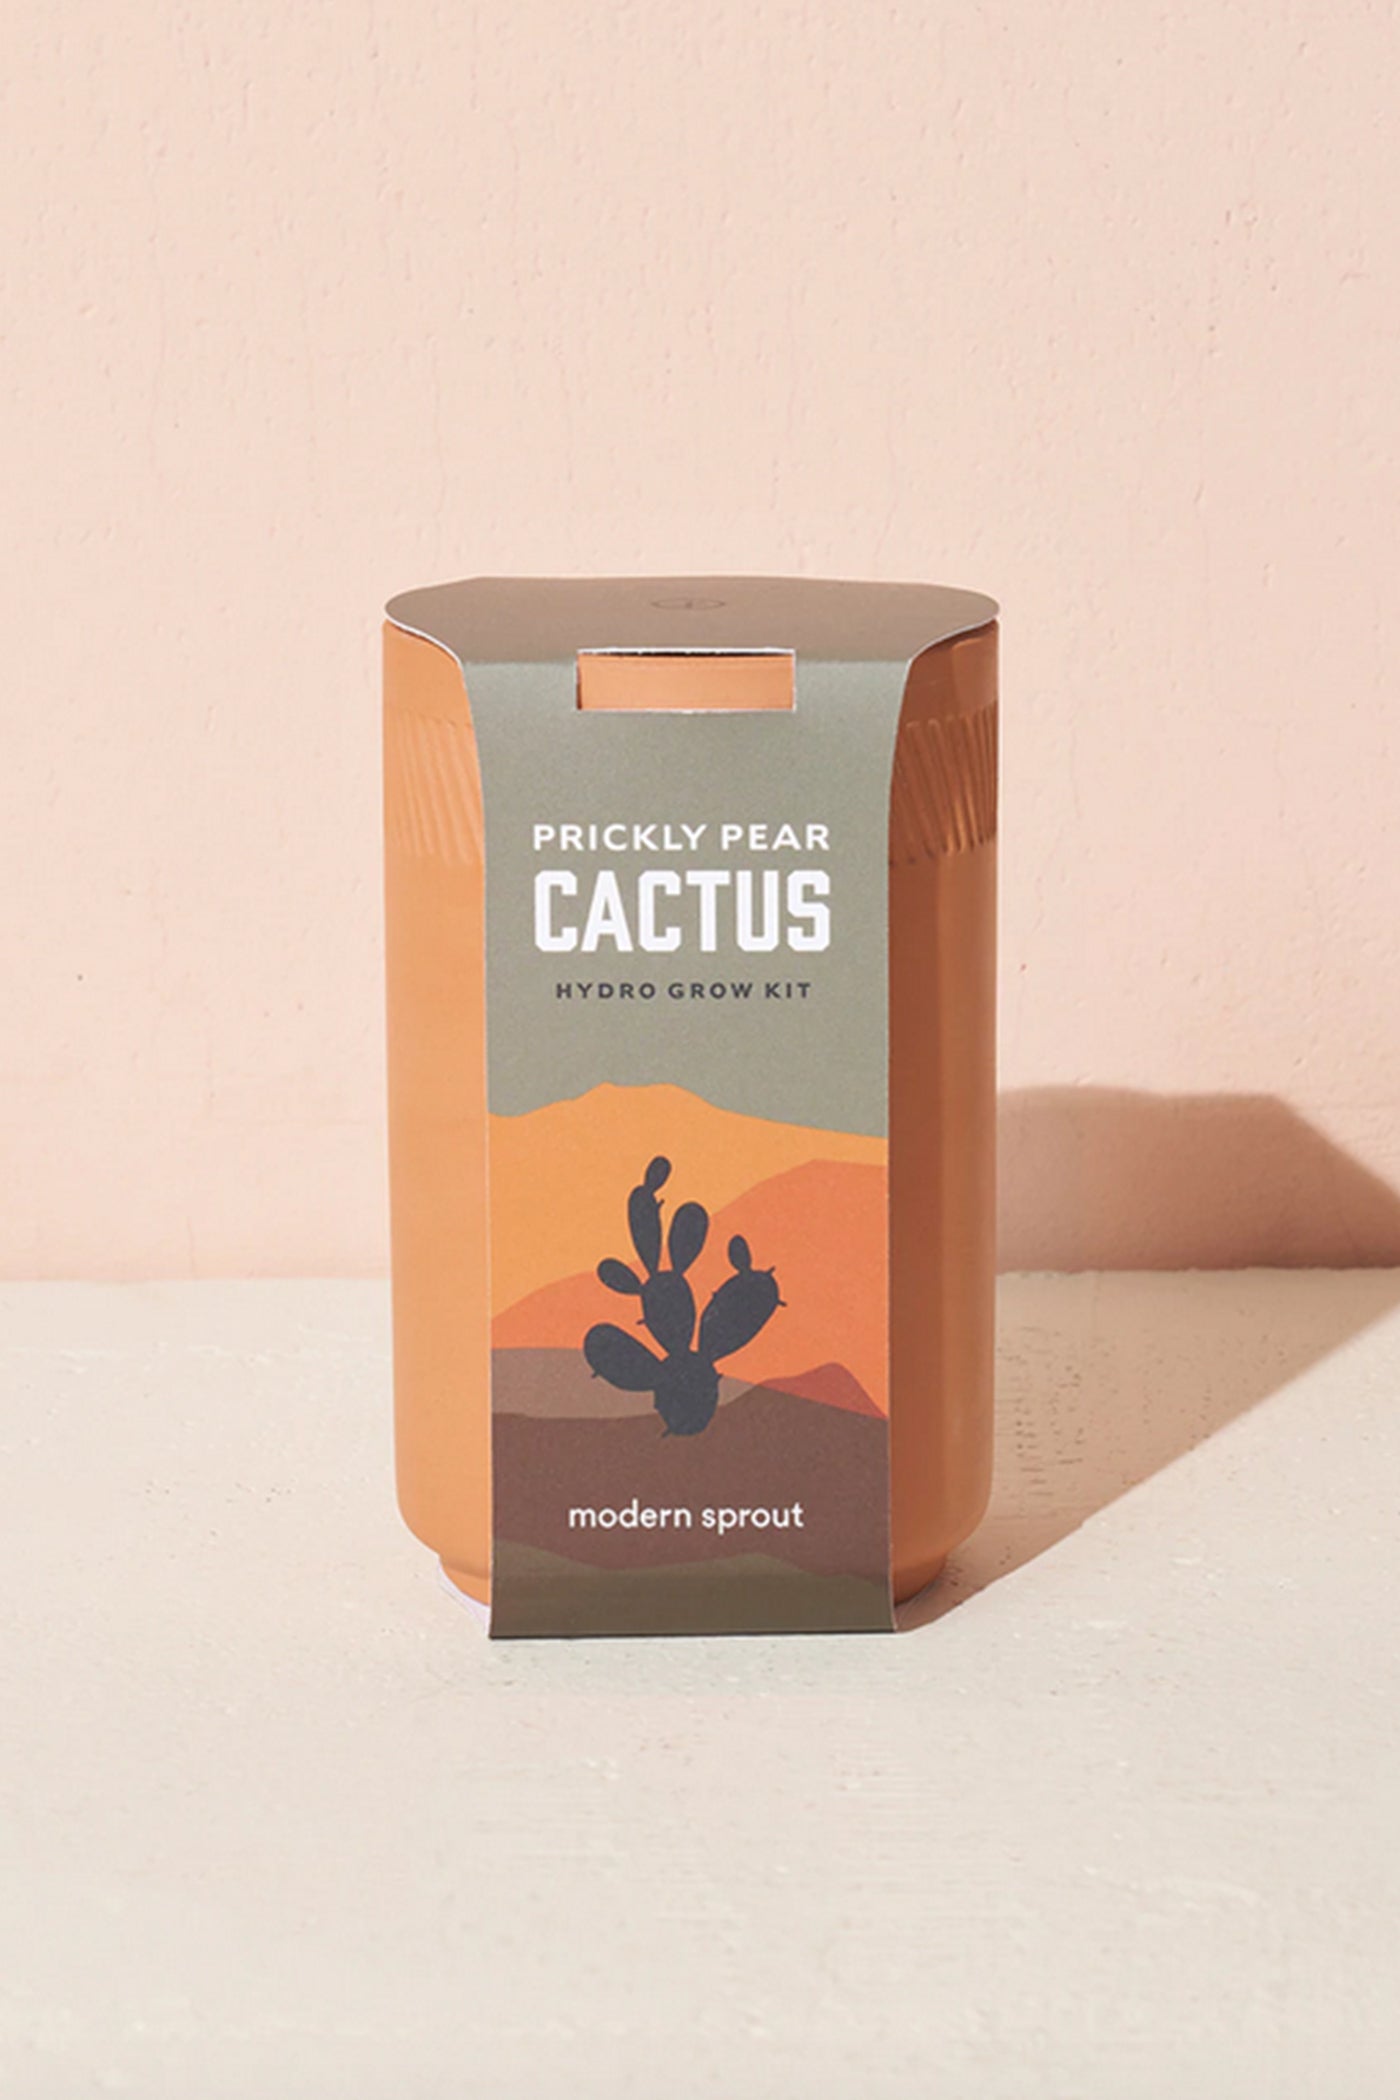 Prickly Pear Cactus Terrcaotta Kit by Modern Sprout